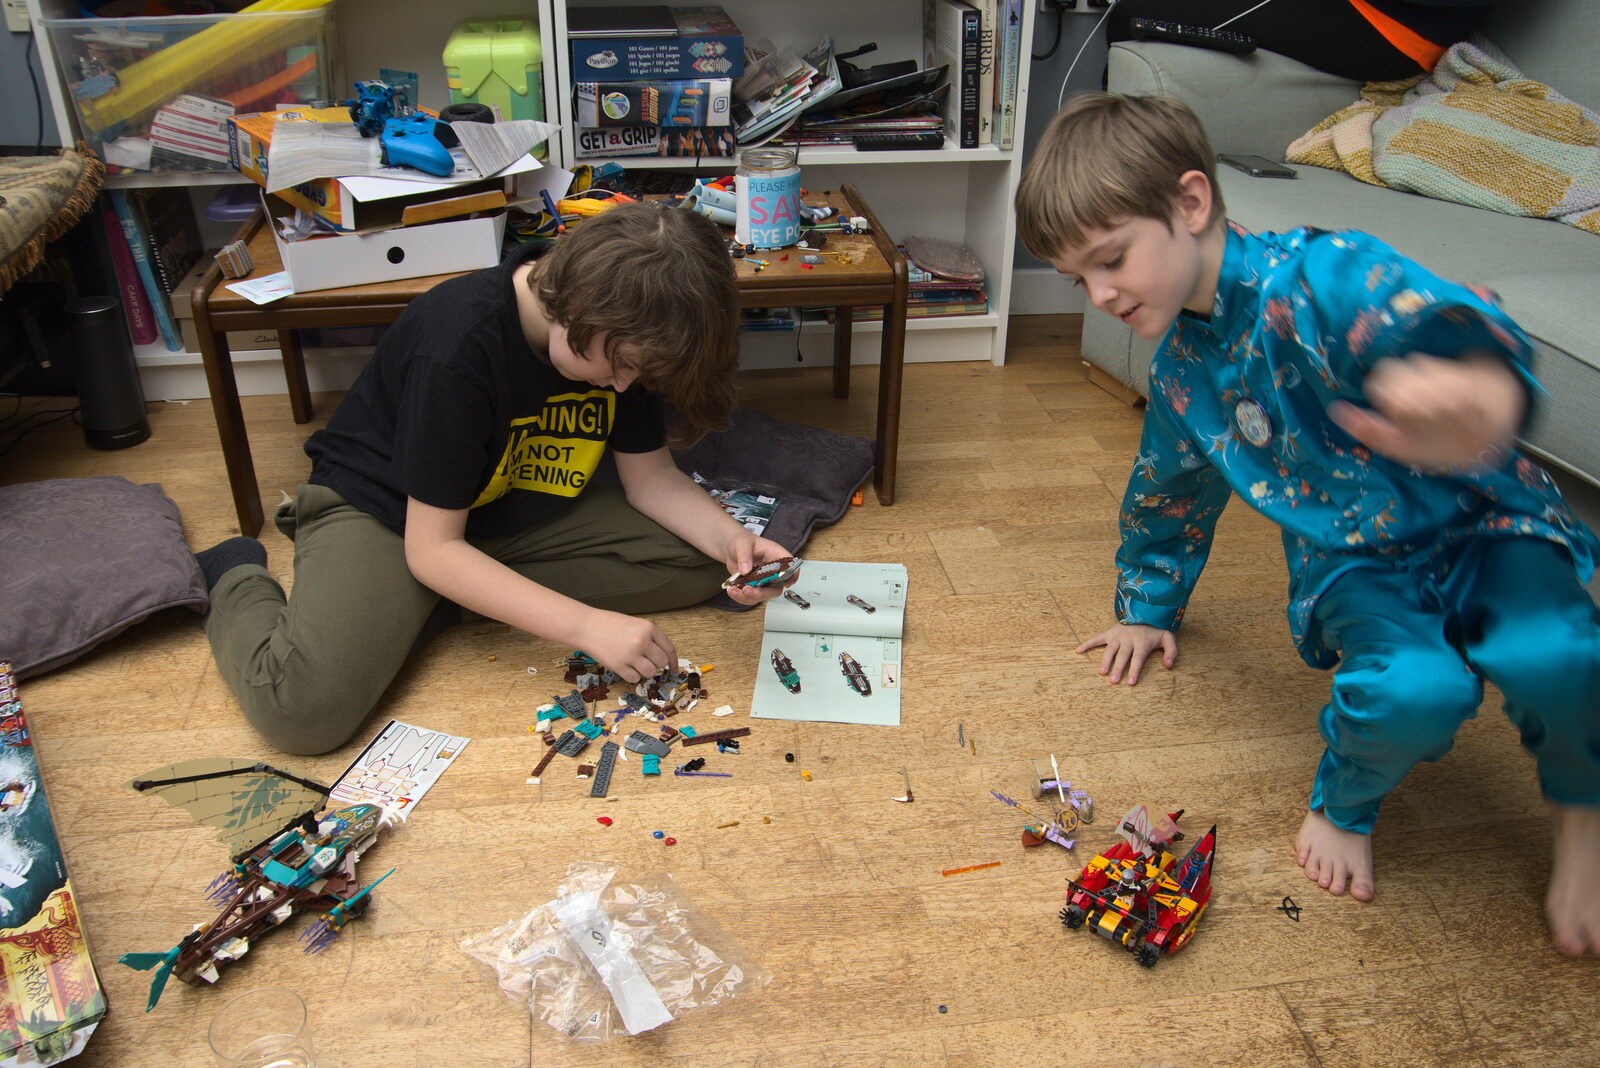 The Lego building continues from A Return to Bressingham Steam and Gardens, Bressingham, Norfolk - 28th March 2021